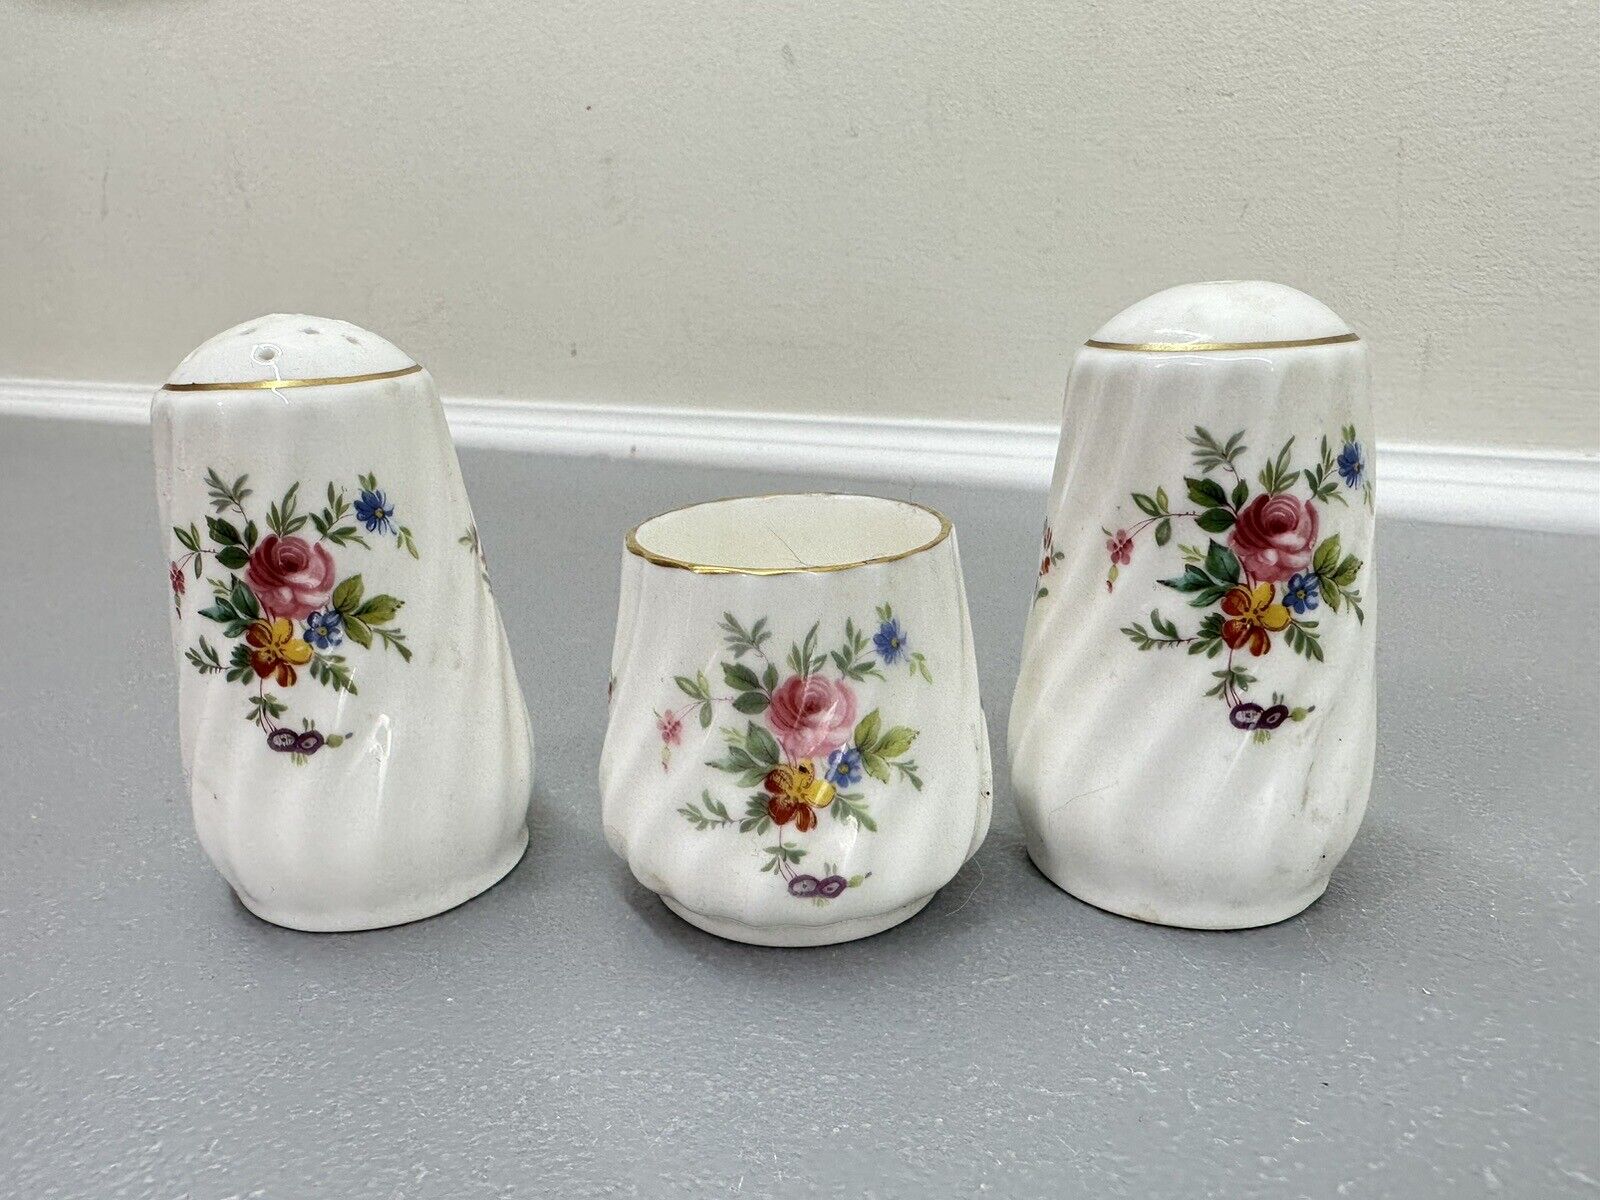 3 Pc Set Decor Minton Marlow Salt And Pepper Shakers & Cup Bone China England